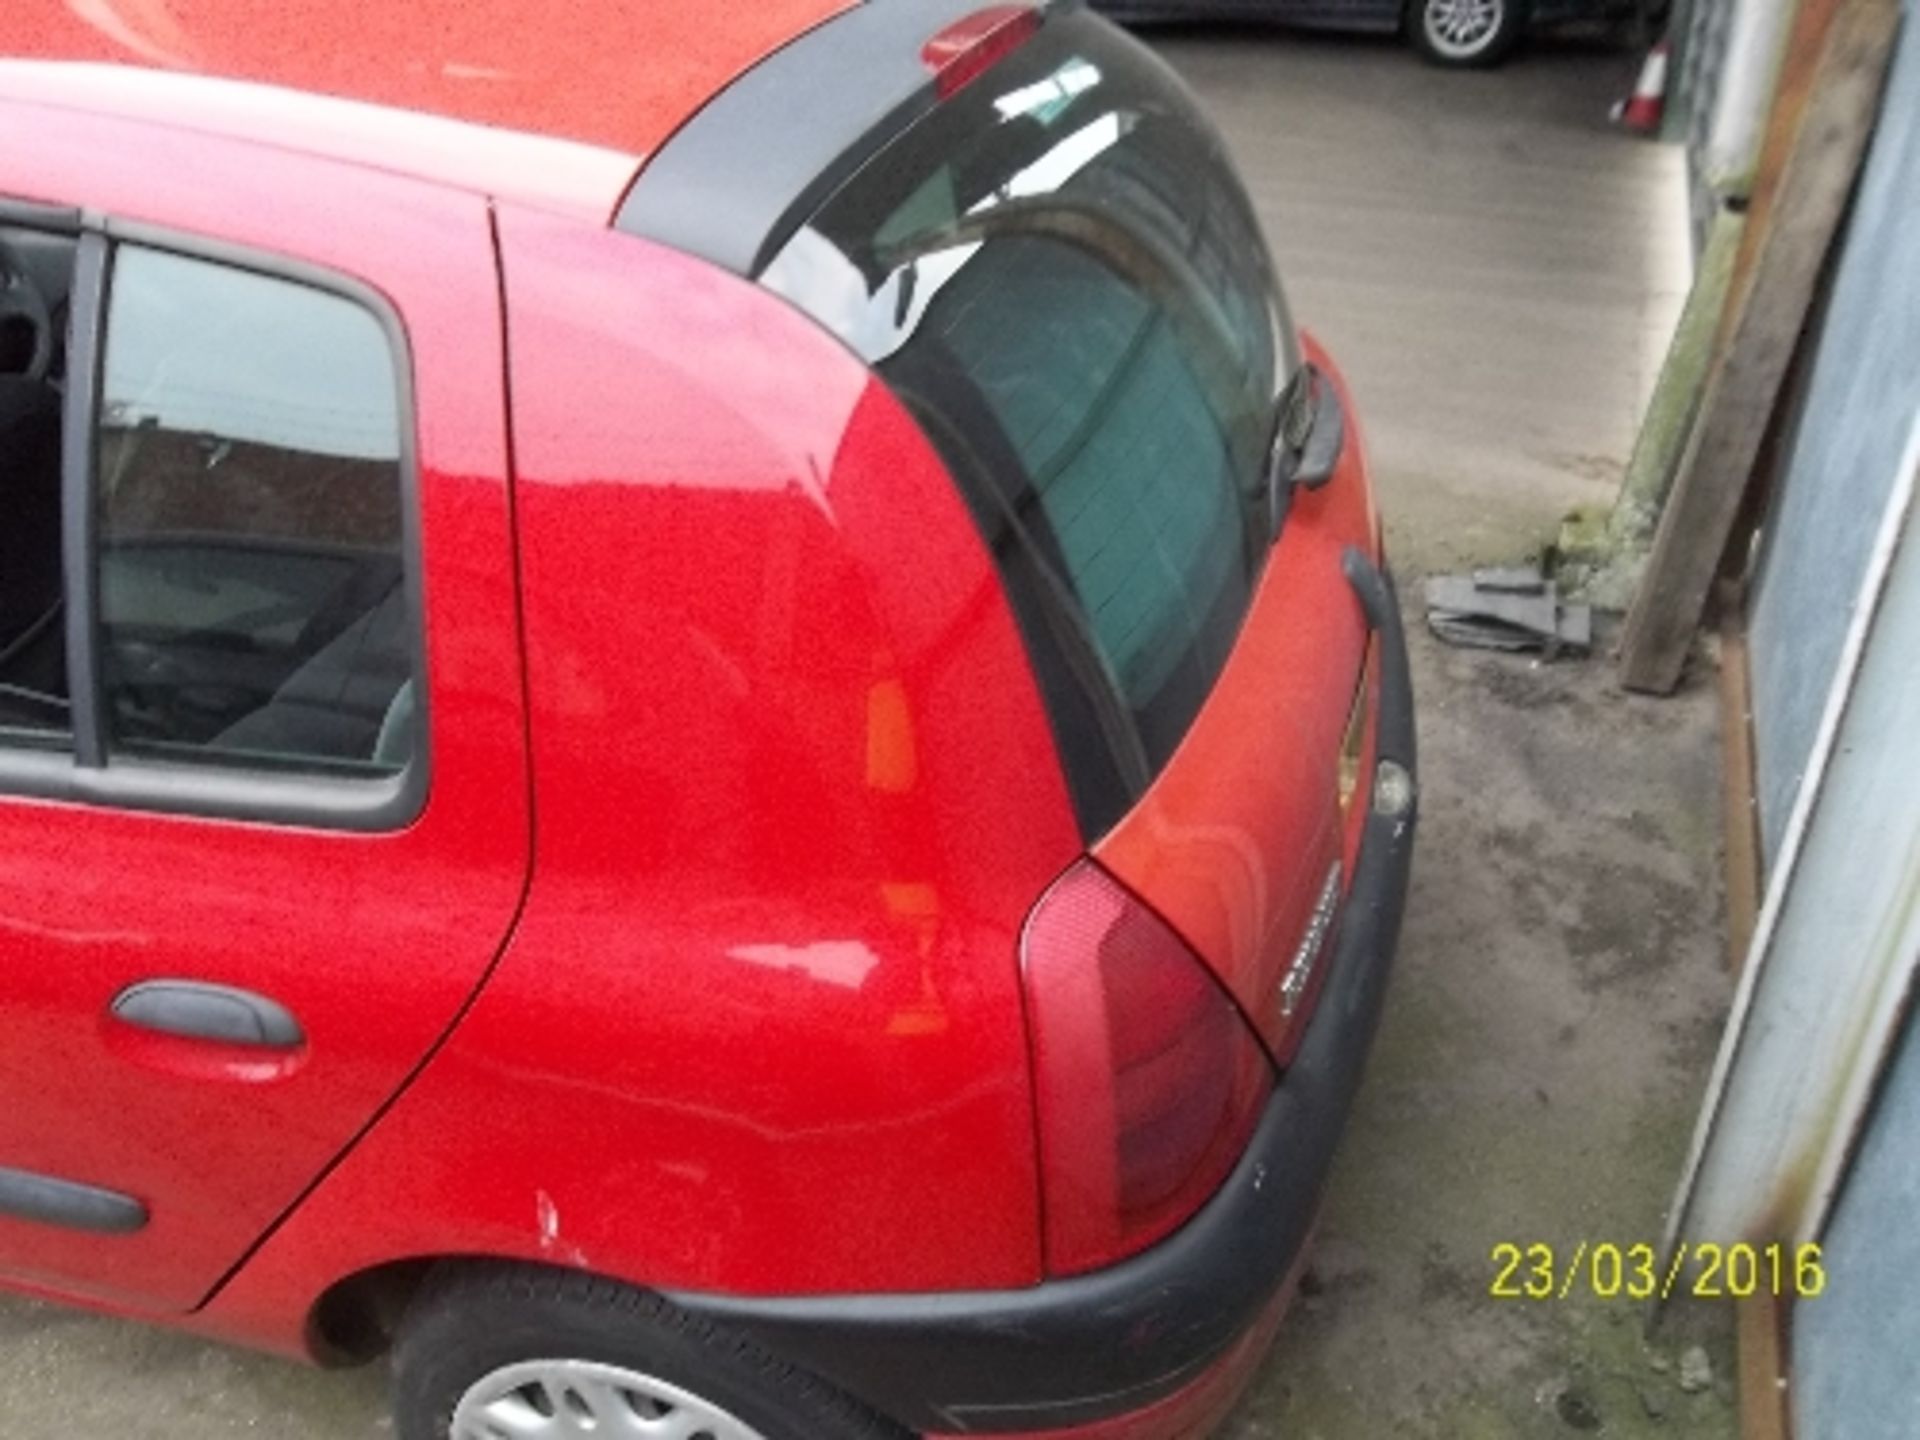 Renault Clio Alize - Y54 UOC Date of registration: 31.03.2001 1390cc, petrol, manual, red Odometer - Image 3 of 4